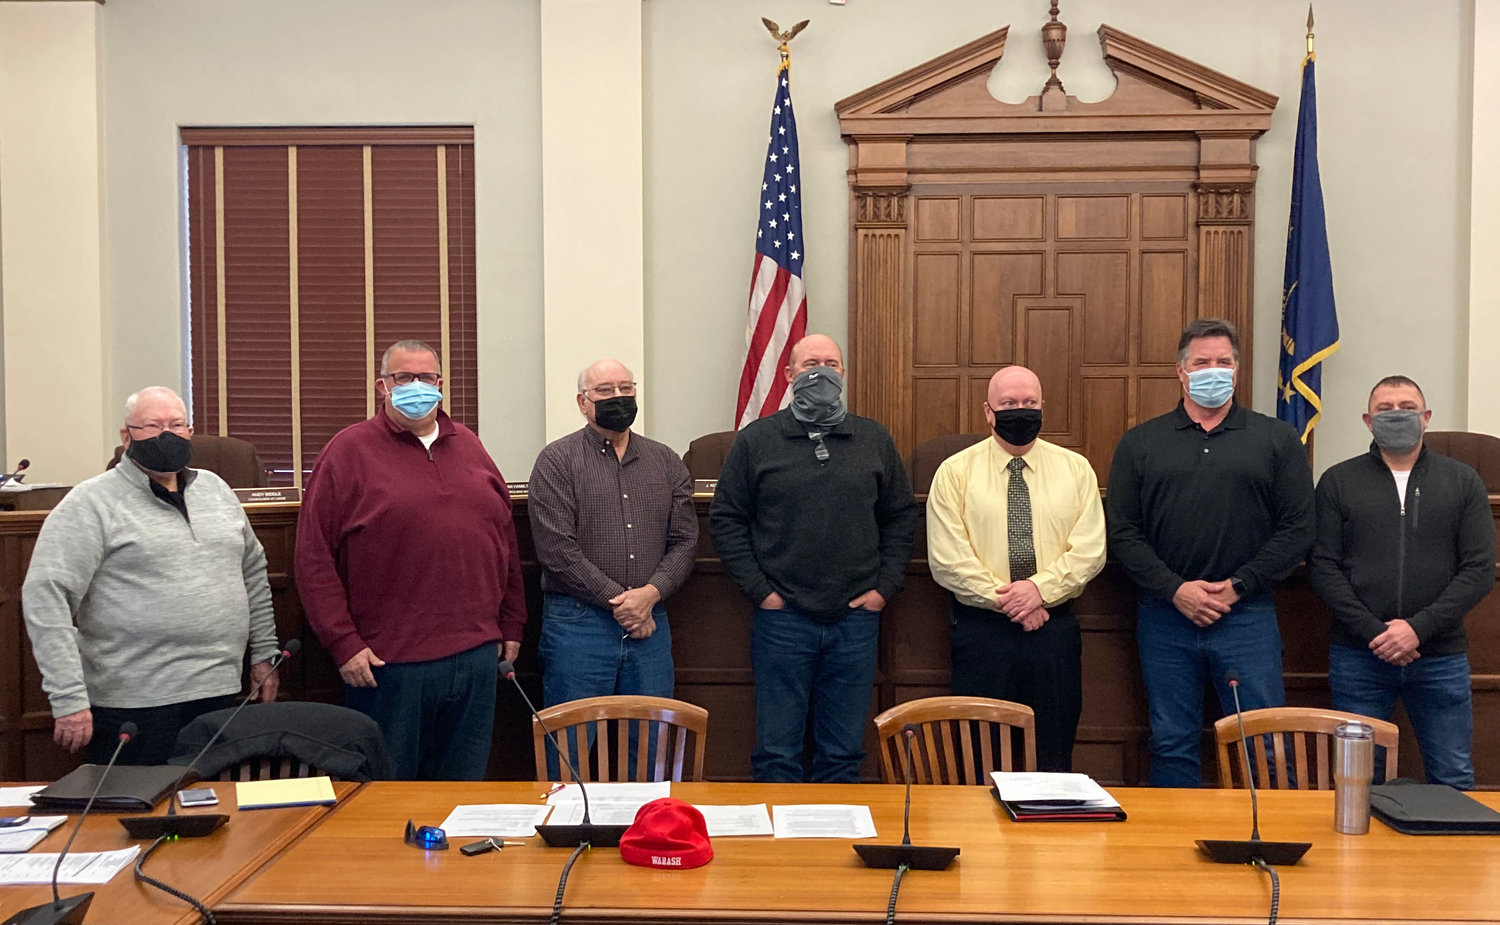 Members of the newly-formed Montgomery County Solid Waste District Board, pictured Monday in the City Building, include, from left, Stan Hamilton, Bob Cox, Don Mills, Dan Guard, Todd Barton, John Frey and Jim Fulwider.